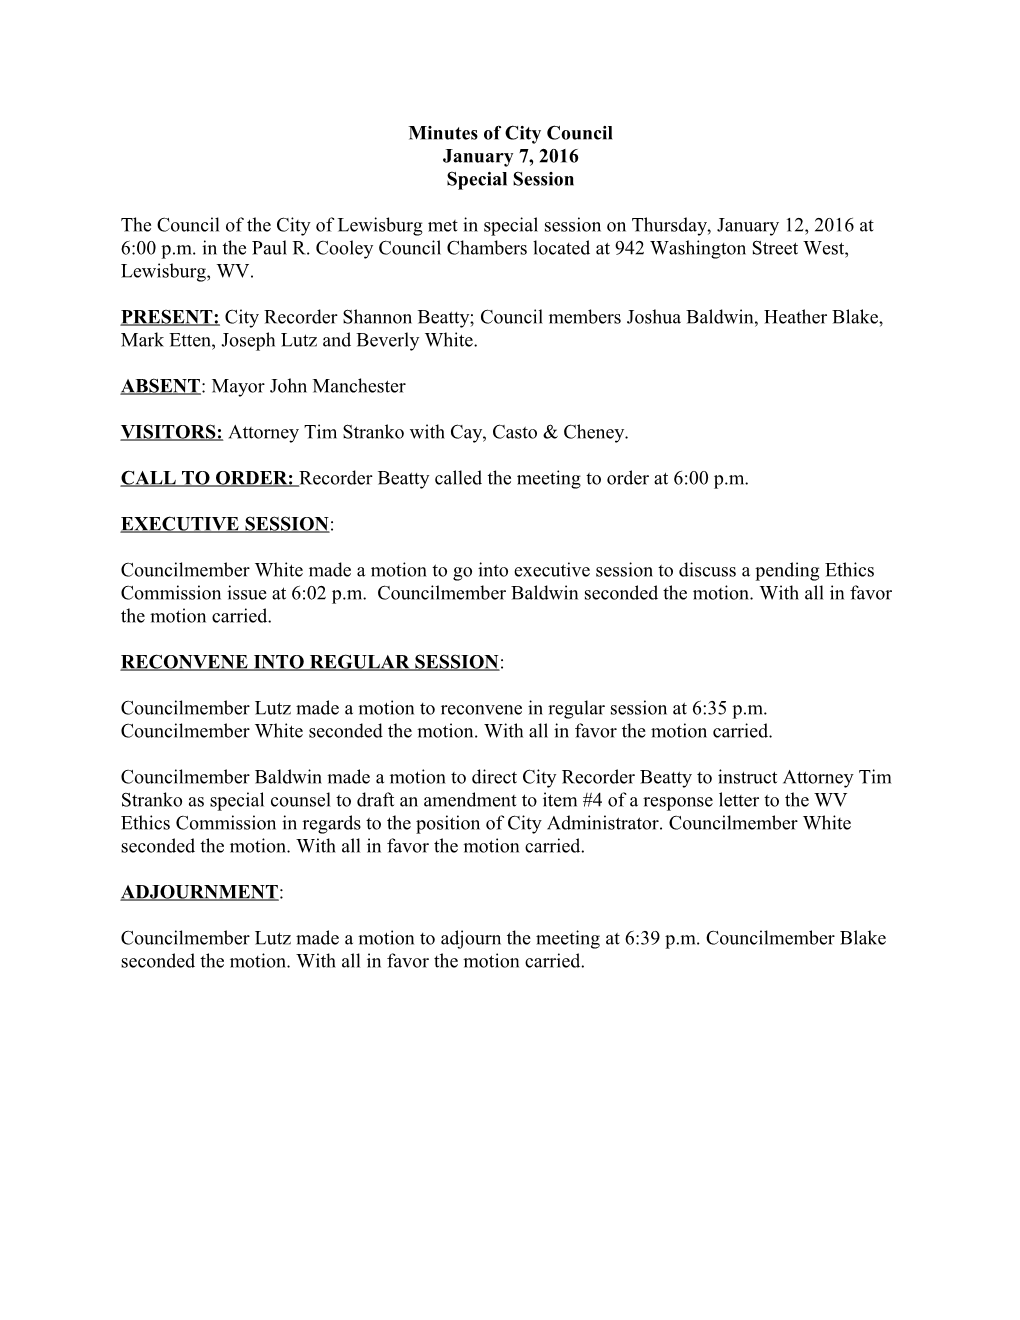 Minutes of City Council s2